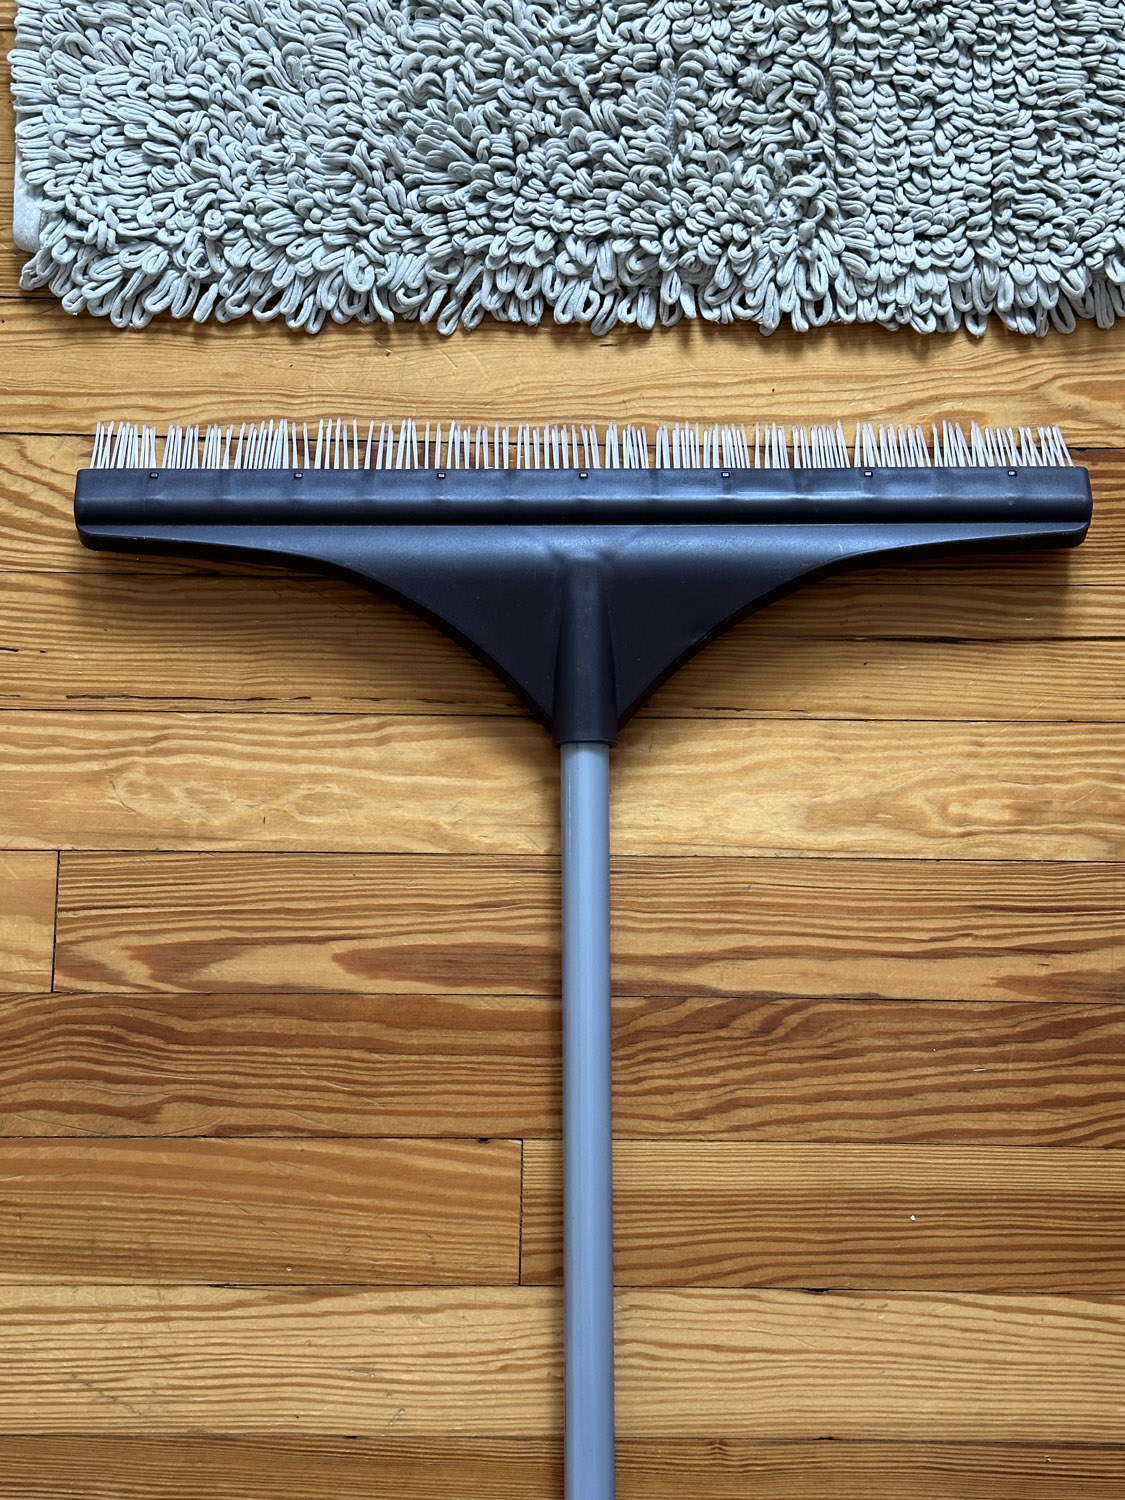 A carpet rake is one of our great unexpected photography tools